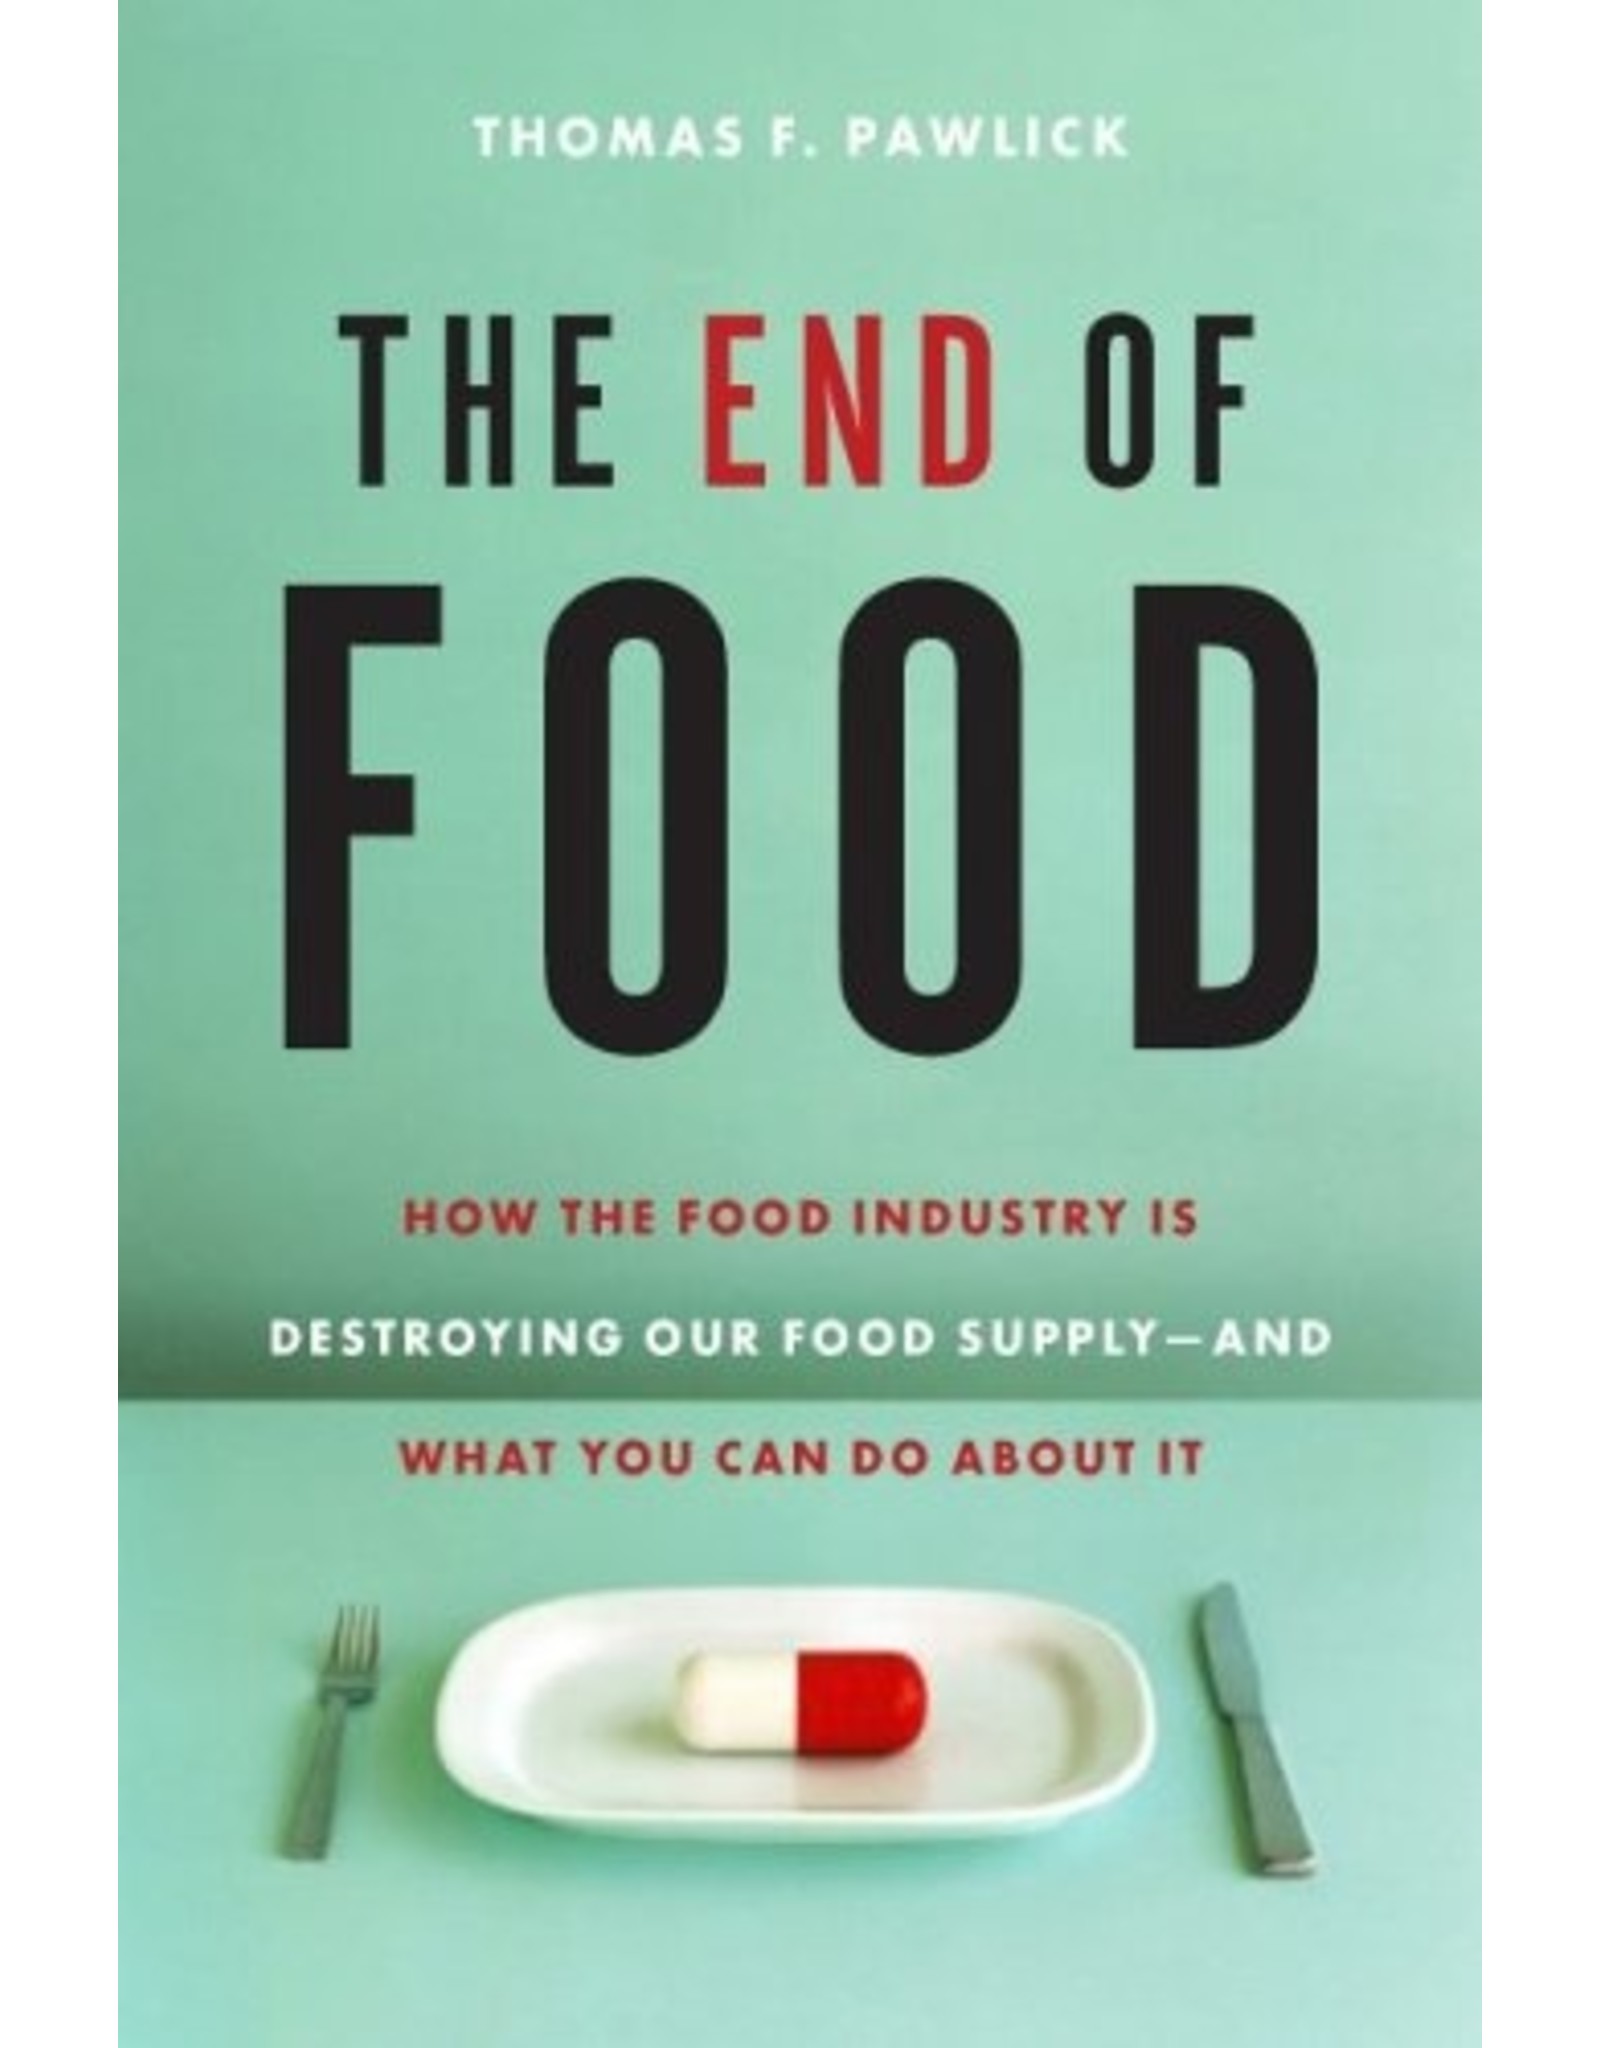 Textbook The End of Food: How the Food Industry is Destroying our Food Supply- And What You Can Do About It